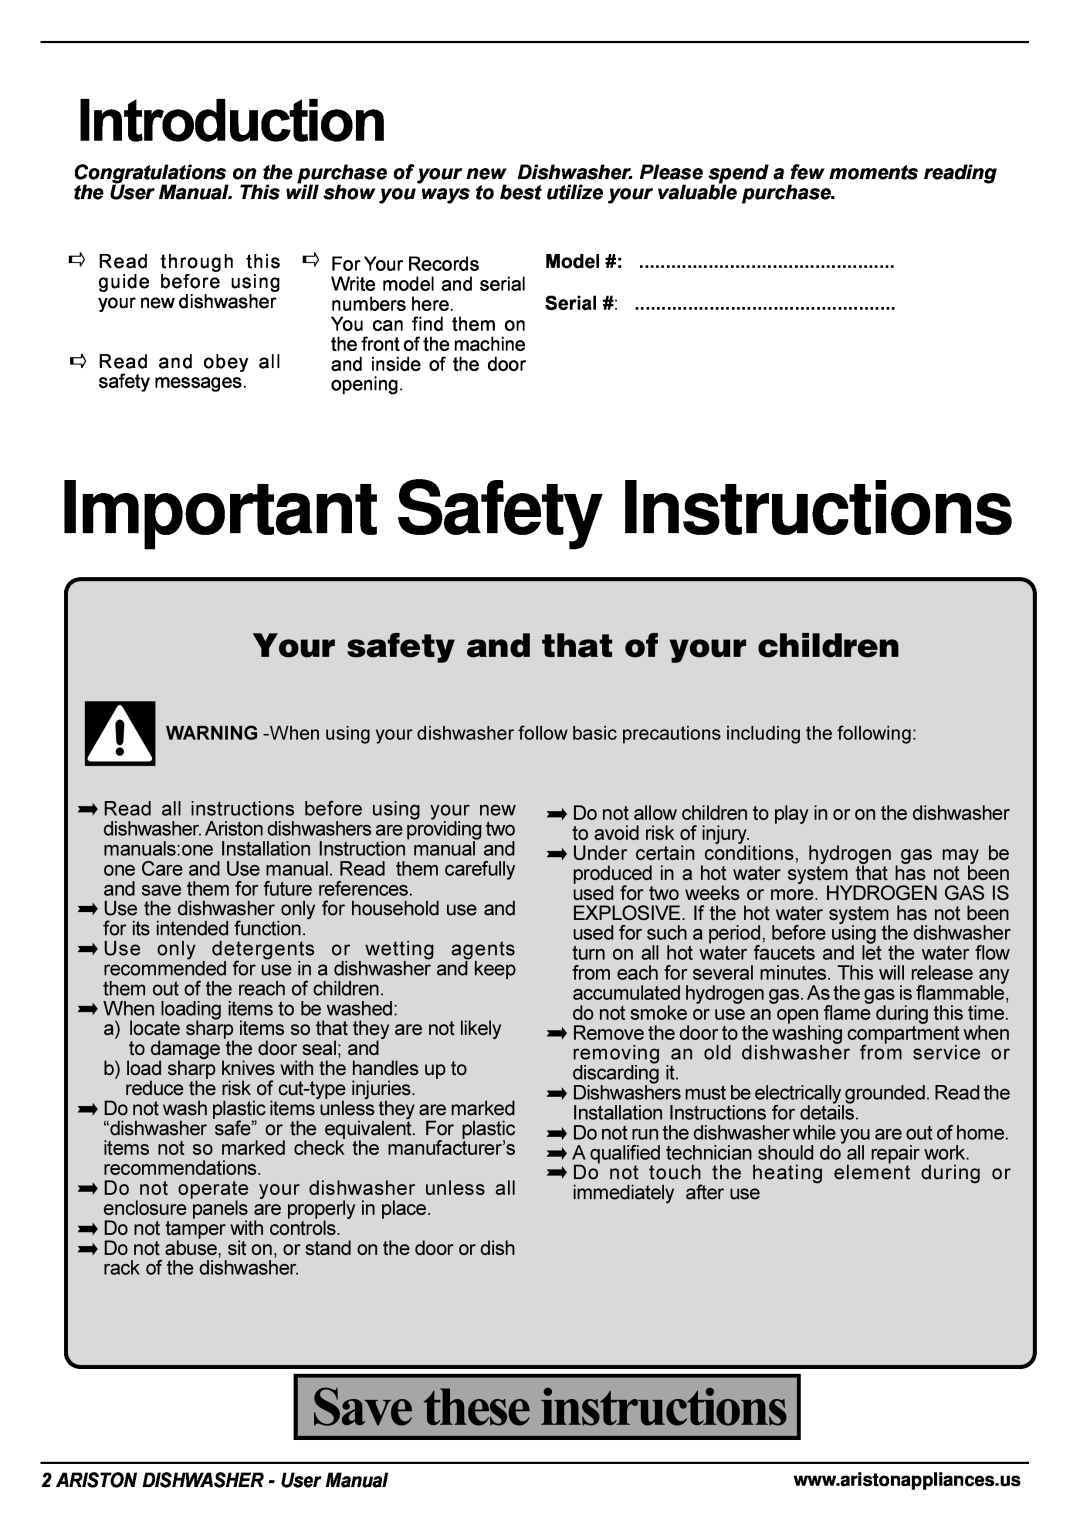 Ariston LI 700 I, LI 700 S manual Introduction, Save these instructions, Your safety and that of your children 